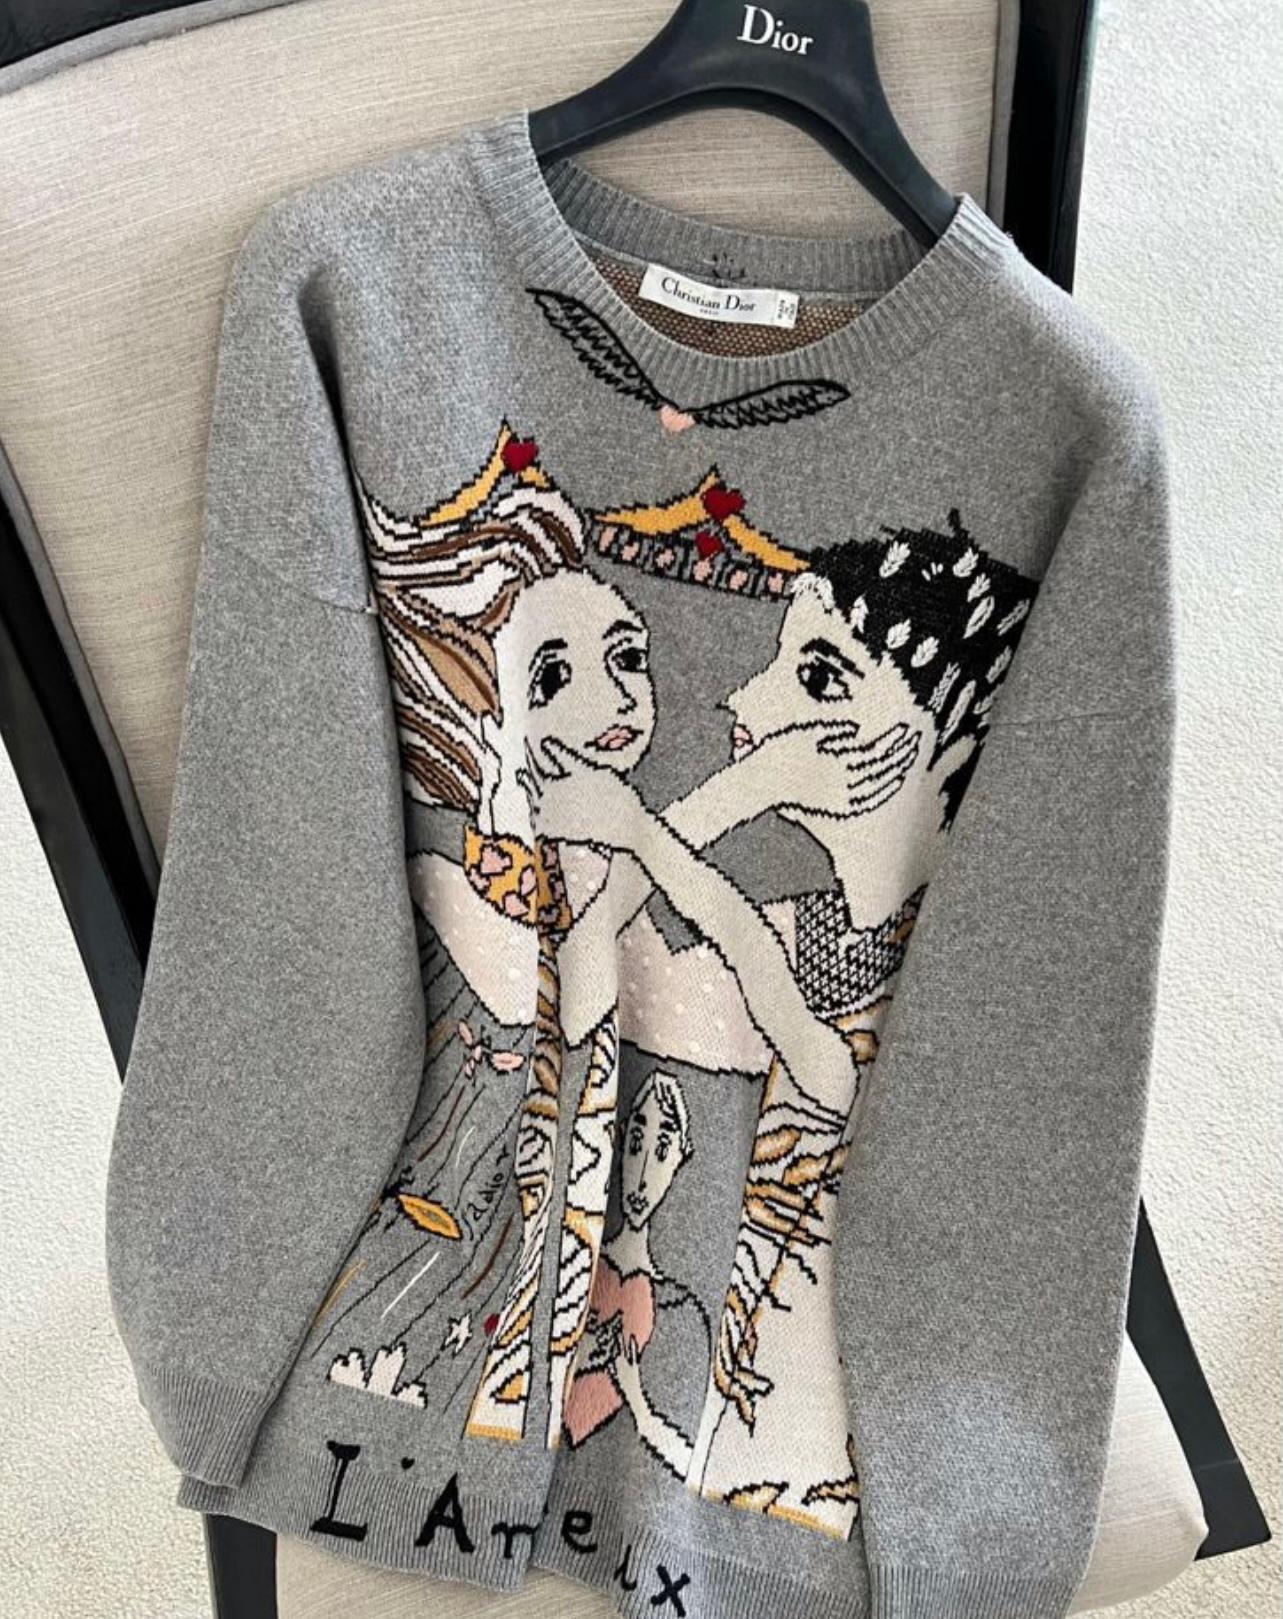 Dior tarot embroidery grey cashmere jumper.
Size mark 42 FR, condition is pristine.